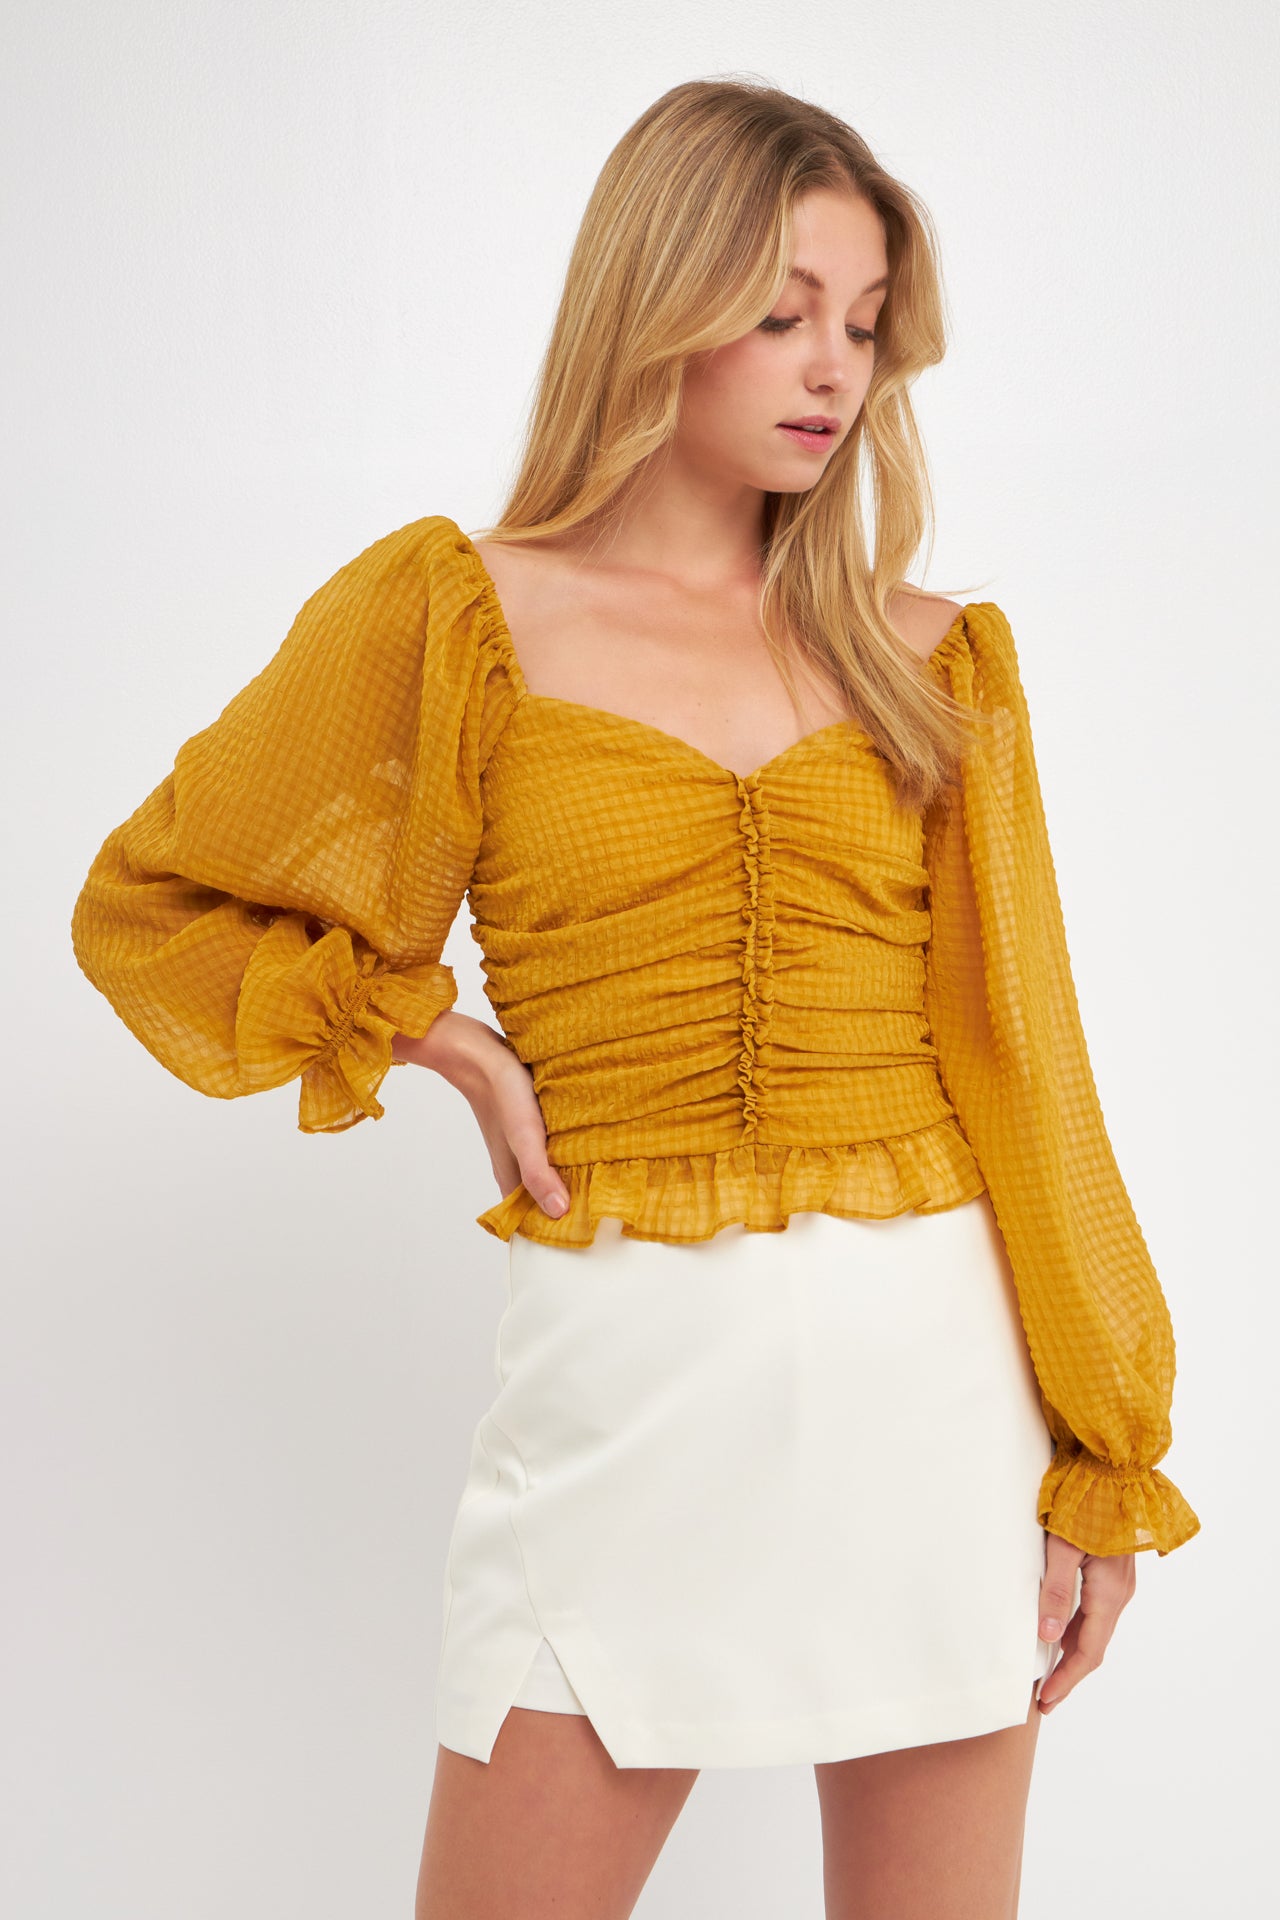 BIANCA CHIFFON GRIDDED RUCHED TOP IN YELLOW